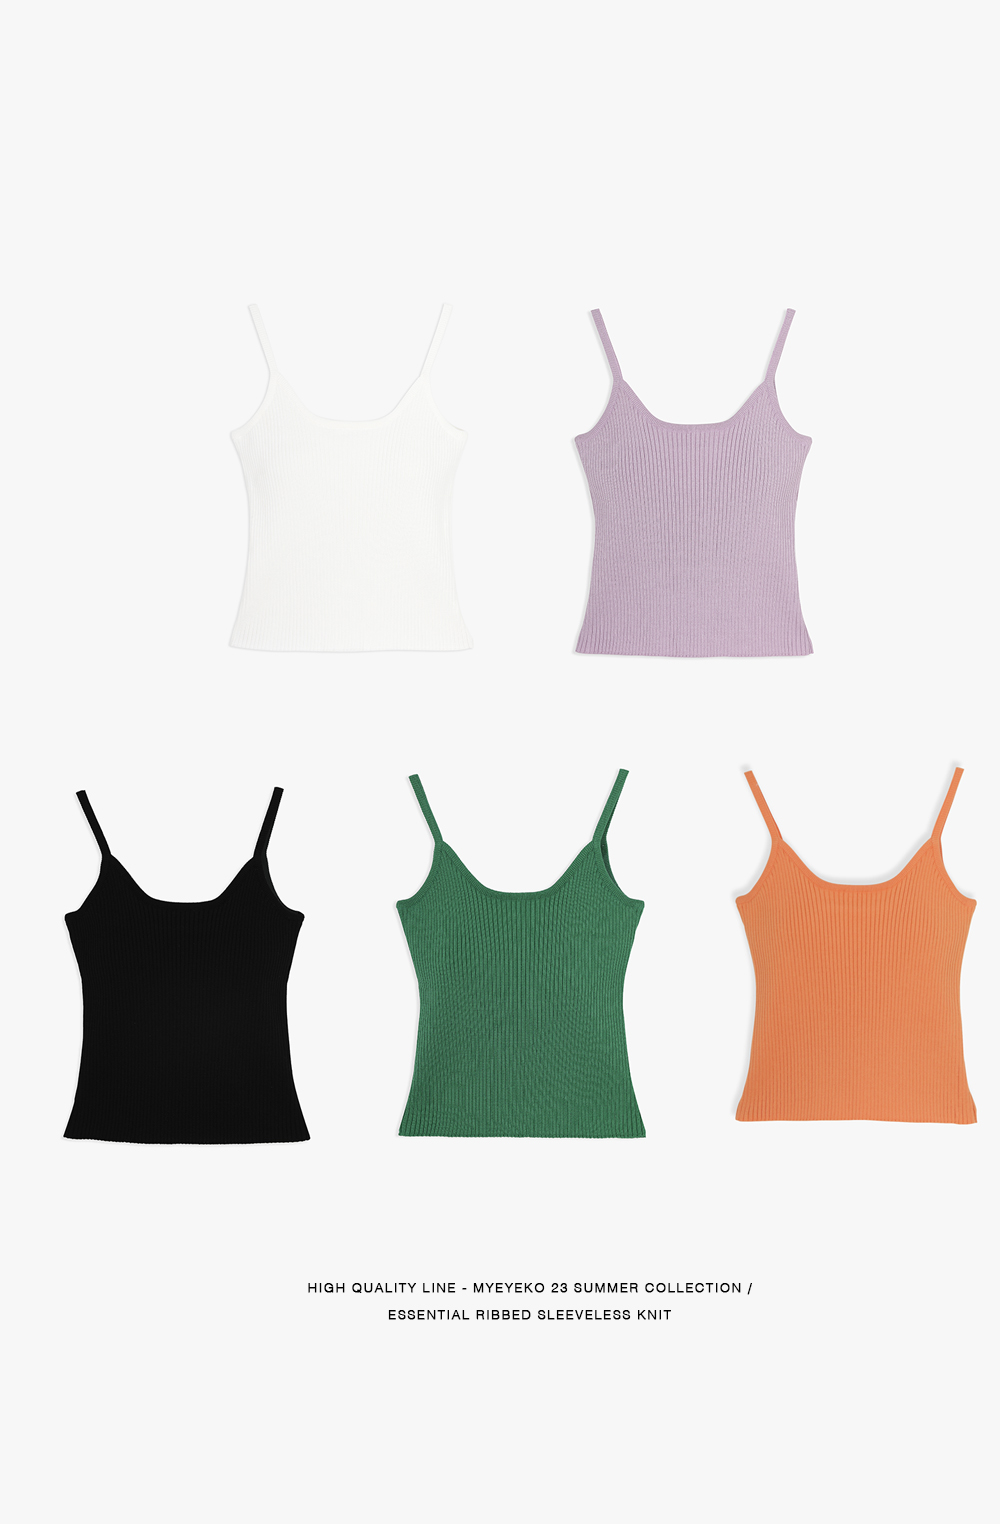 HIGH QUALITY LINE - ESSENTIAL RIBBED SLEEVELESS KNIT